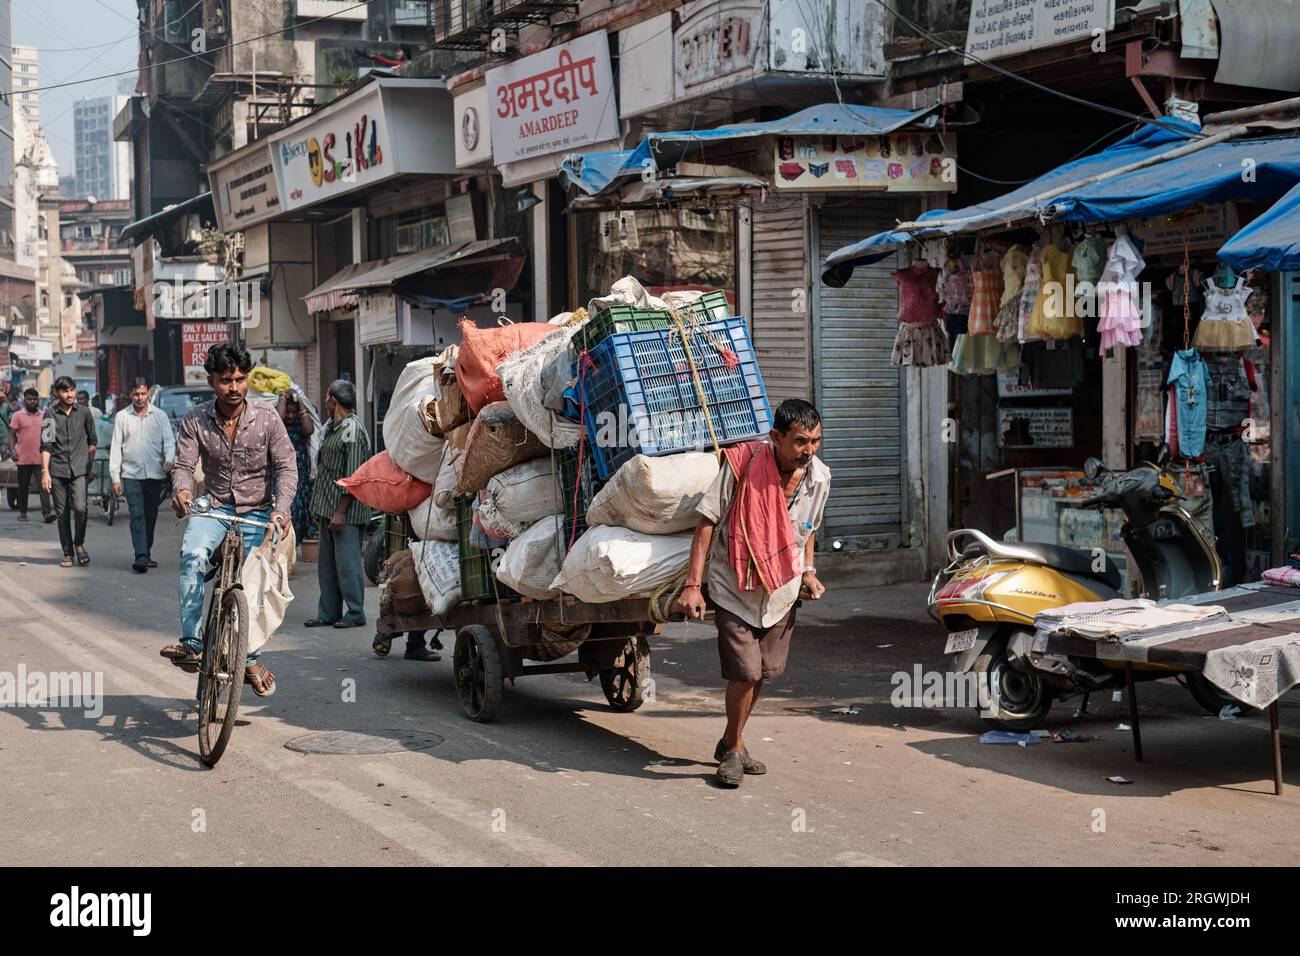 In a street in commercial area Bhuleshwar, Mumbai, India, a handcart puller struggles to pull an overloaded cart, while being overtaken by a cyclist Stock Photo